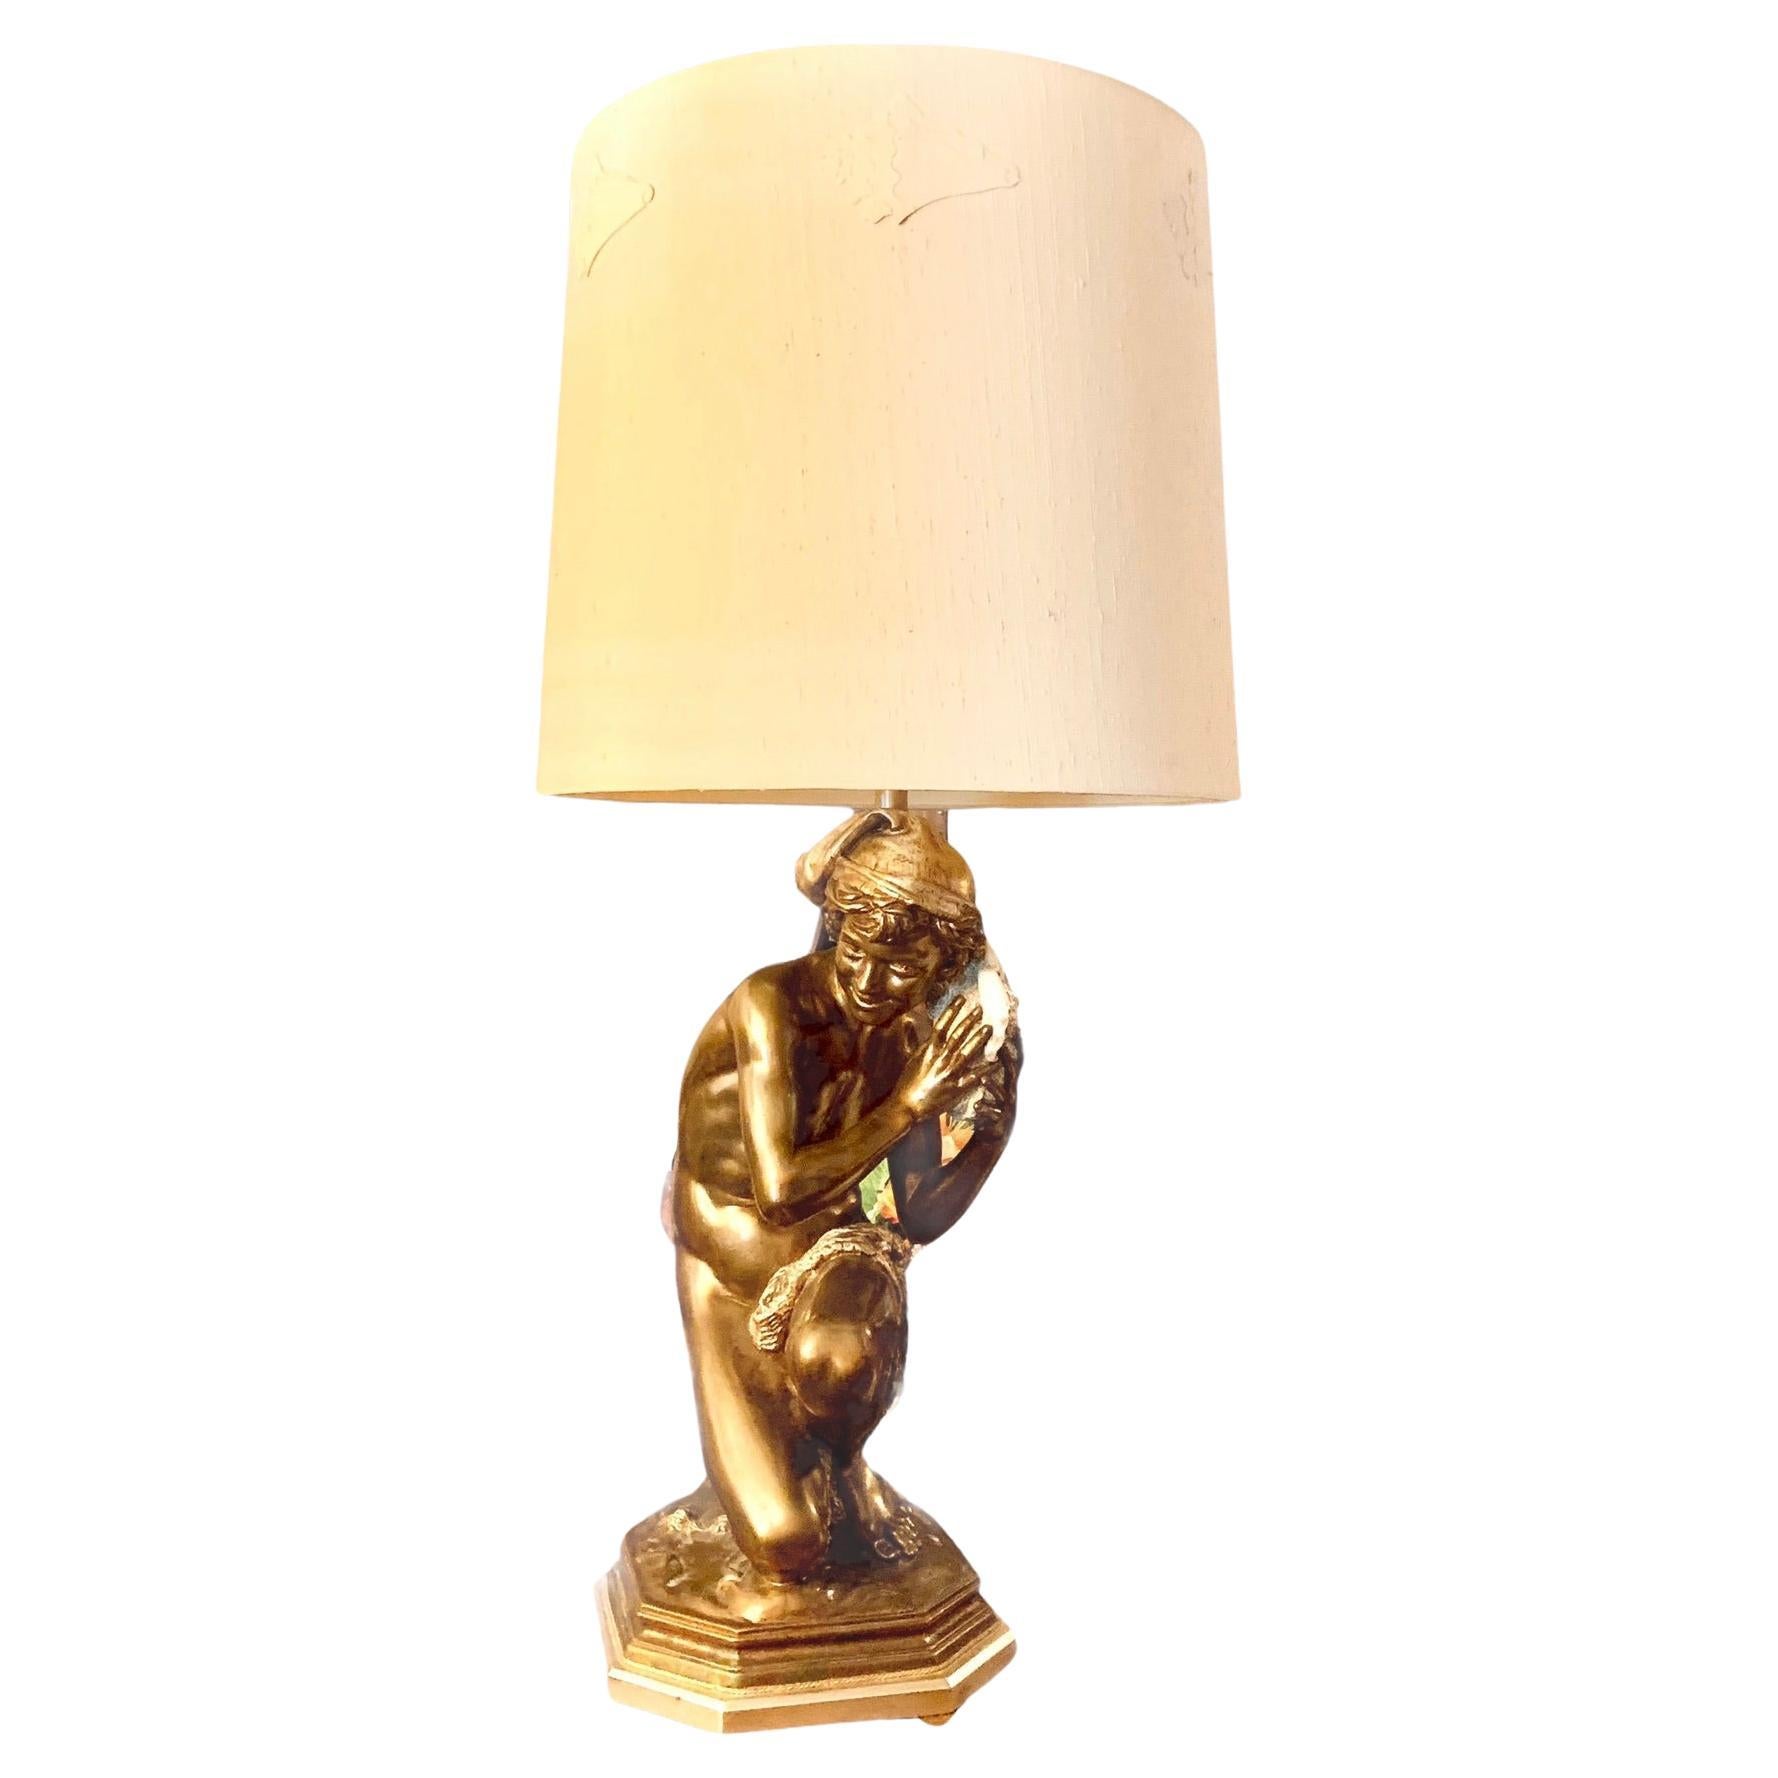 Vintage 1940's Hollywood Regency Marbro Lamp With Original Shade For Sale